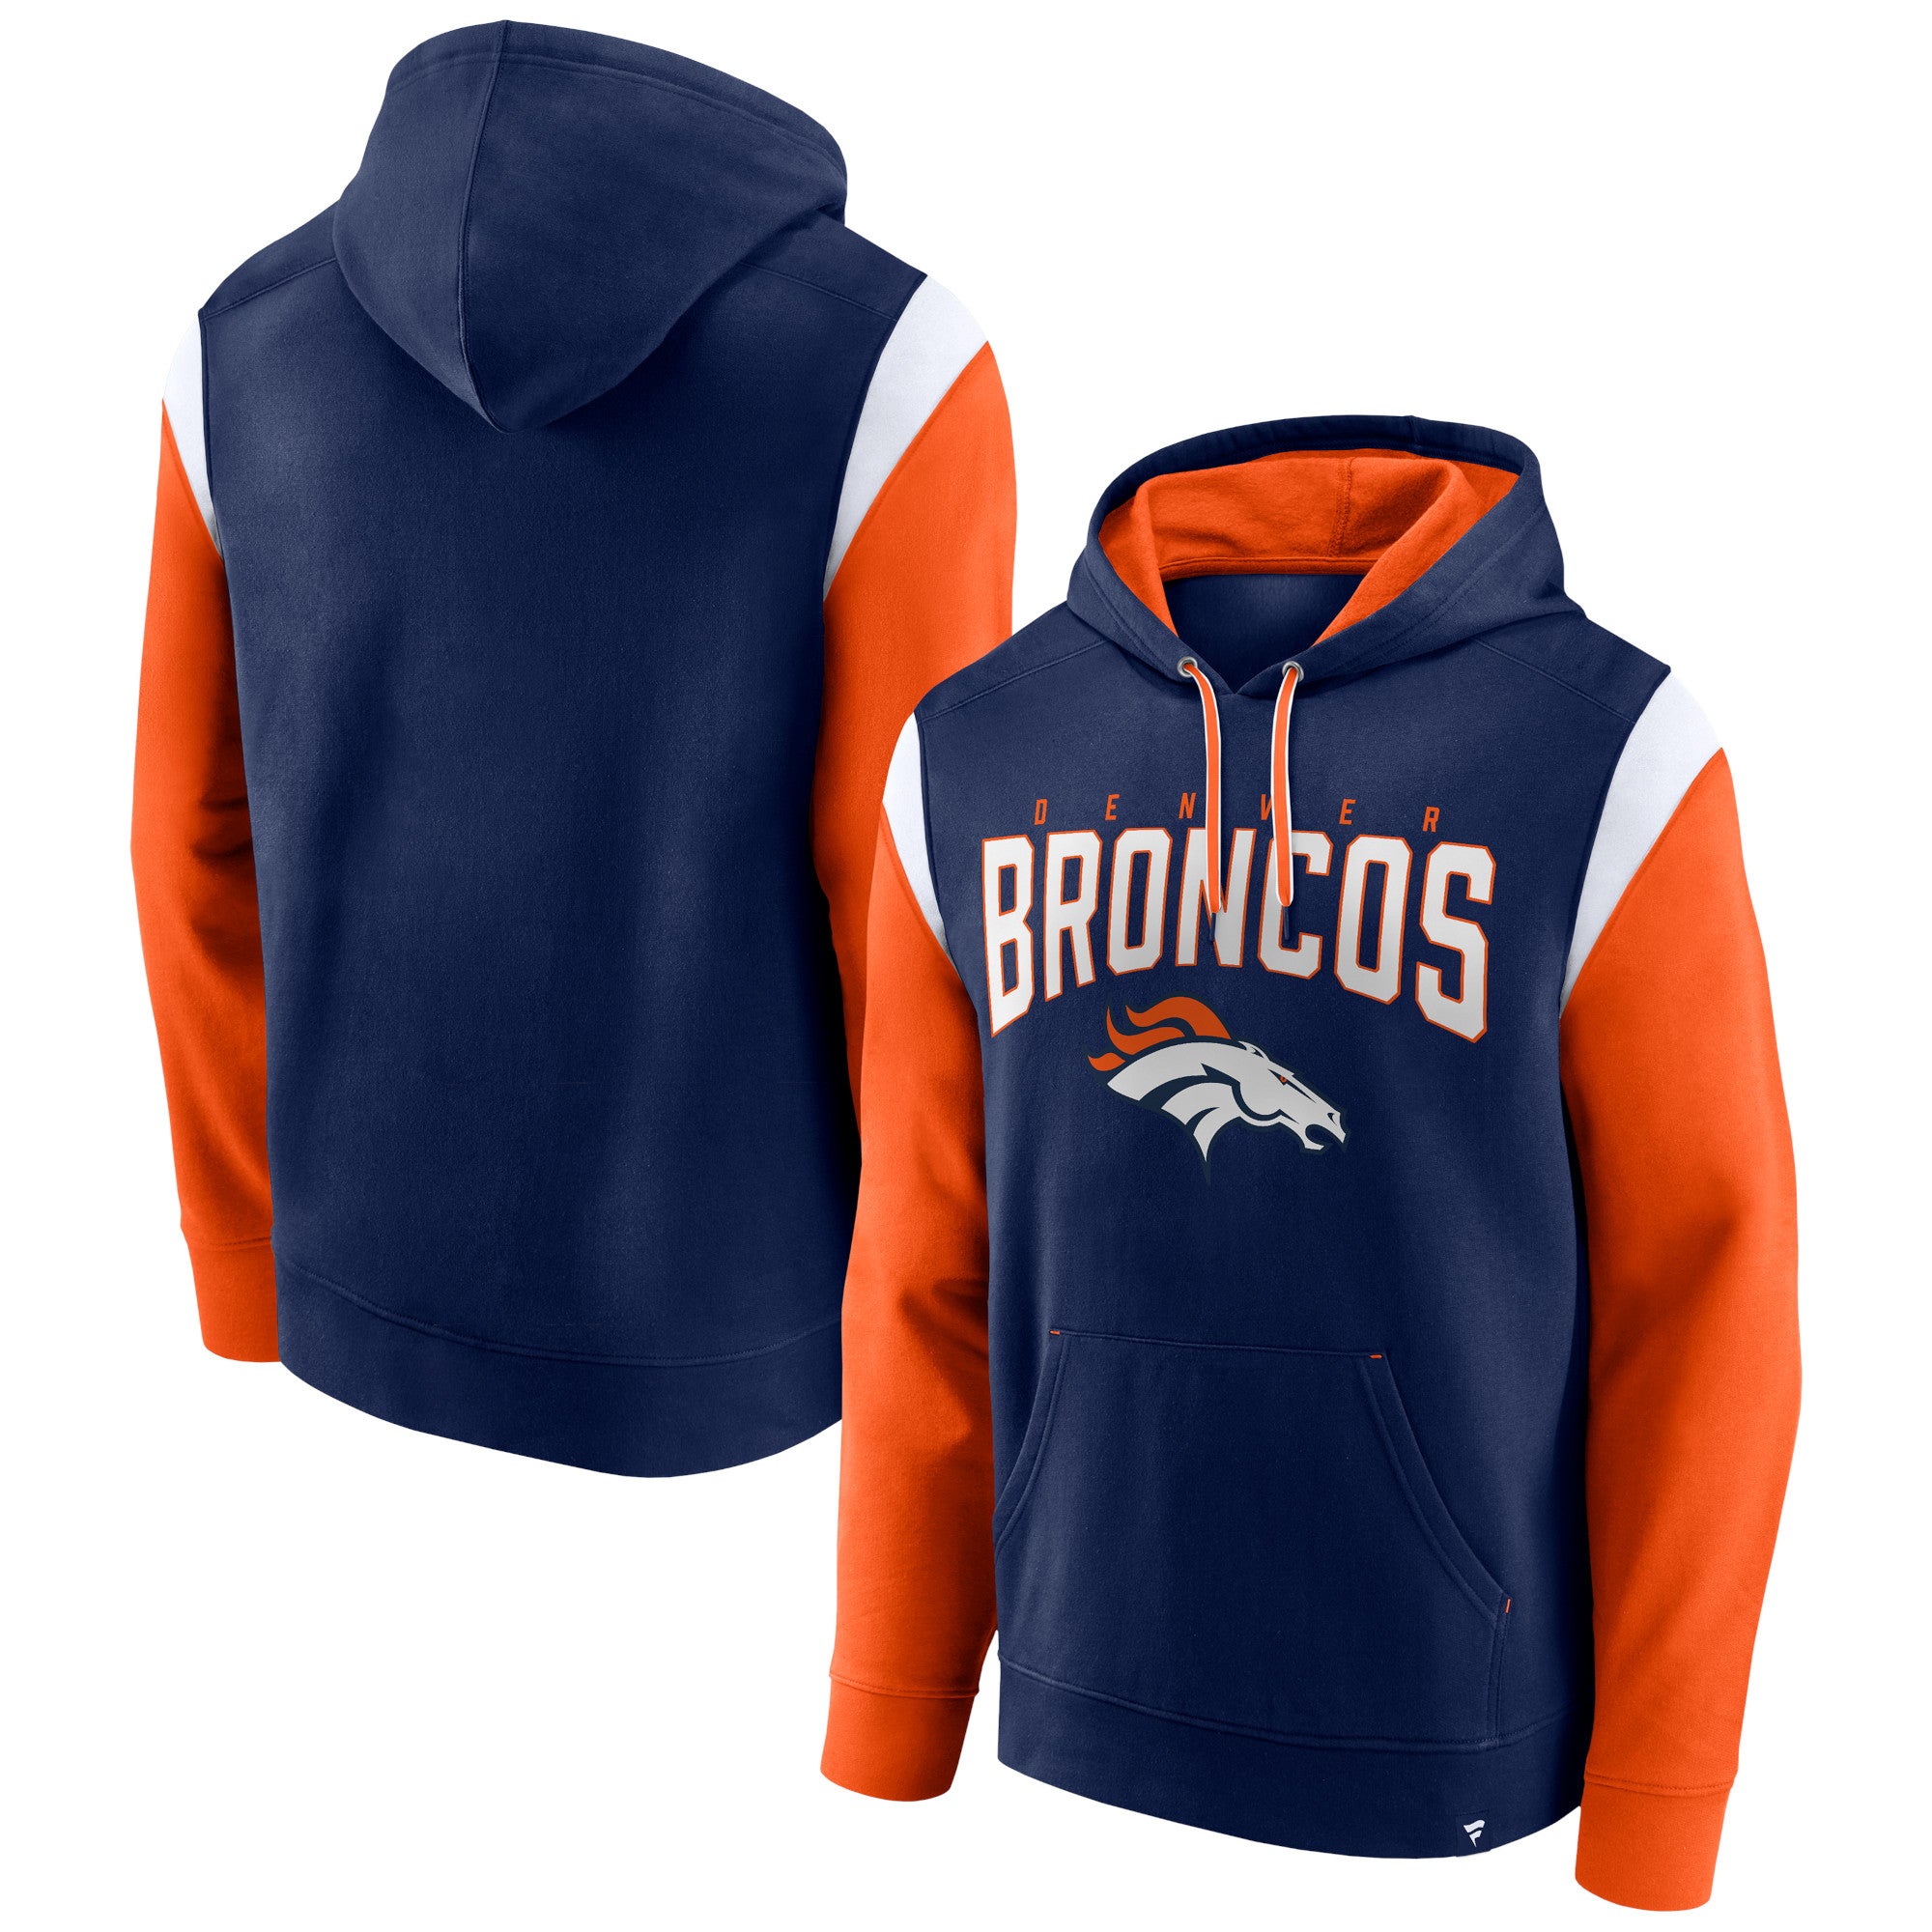 Fanatics Broncos Trench Battle Pullover Hoodie